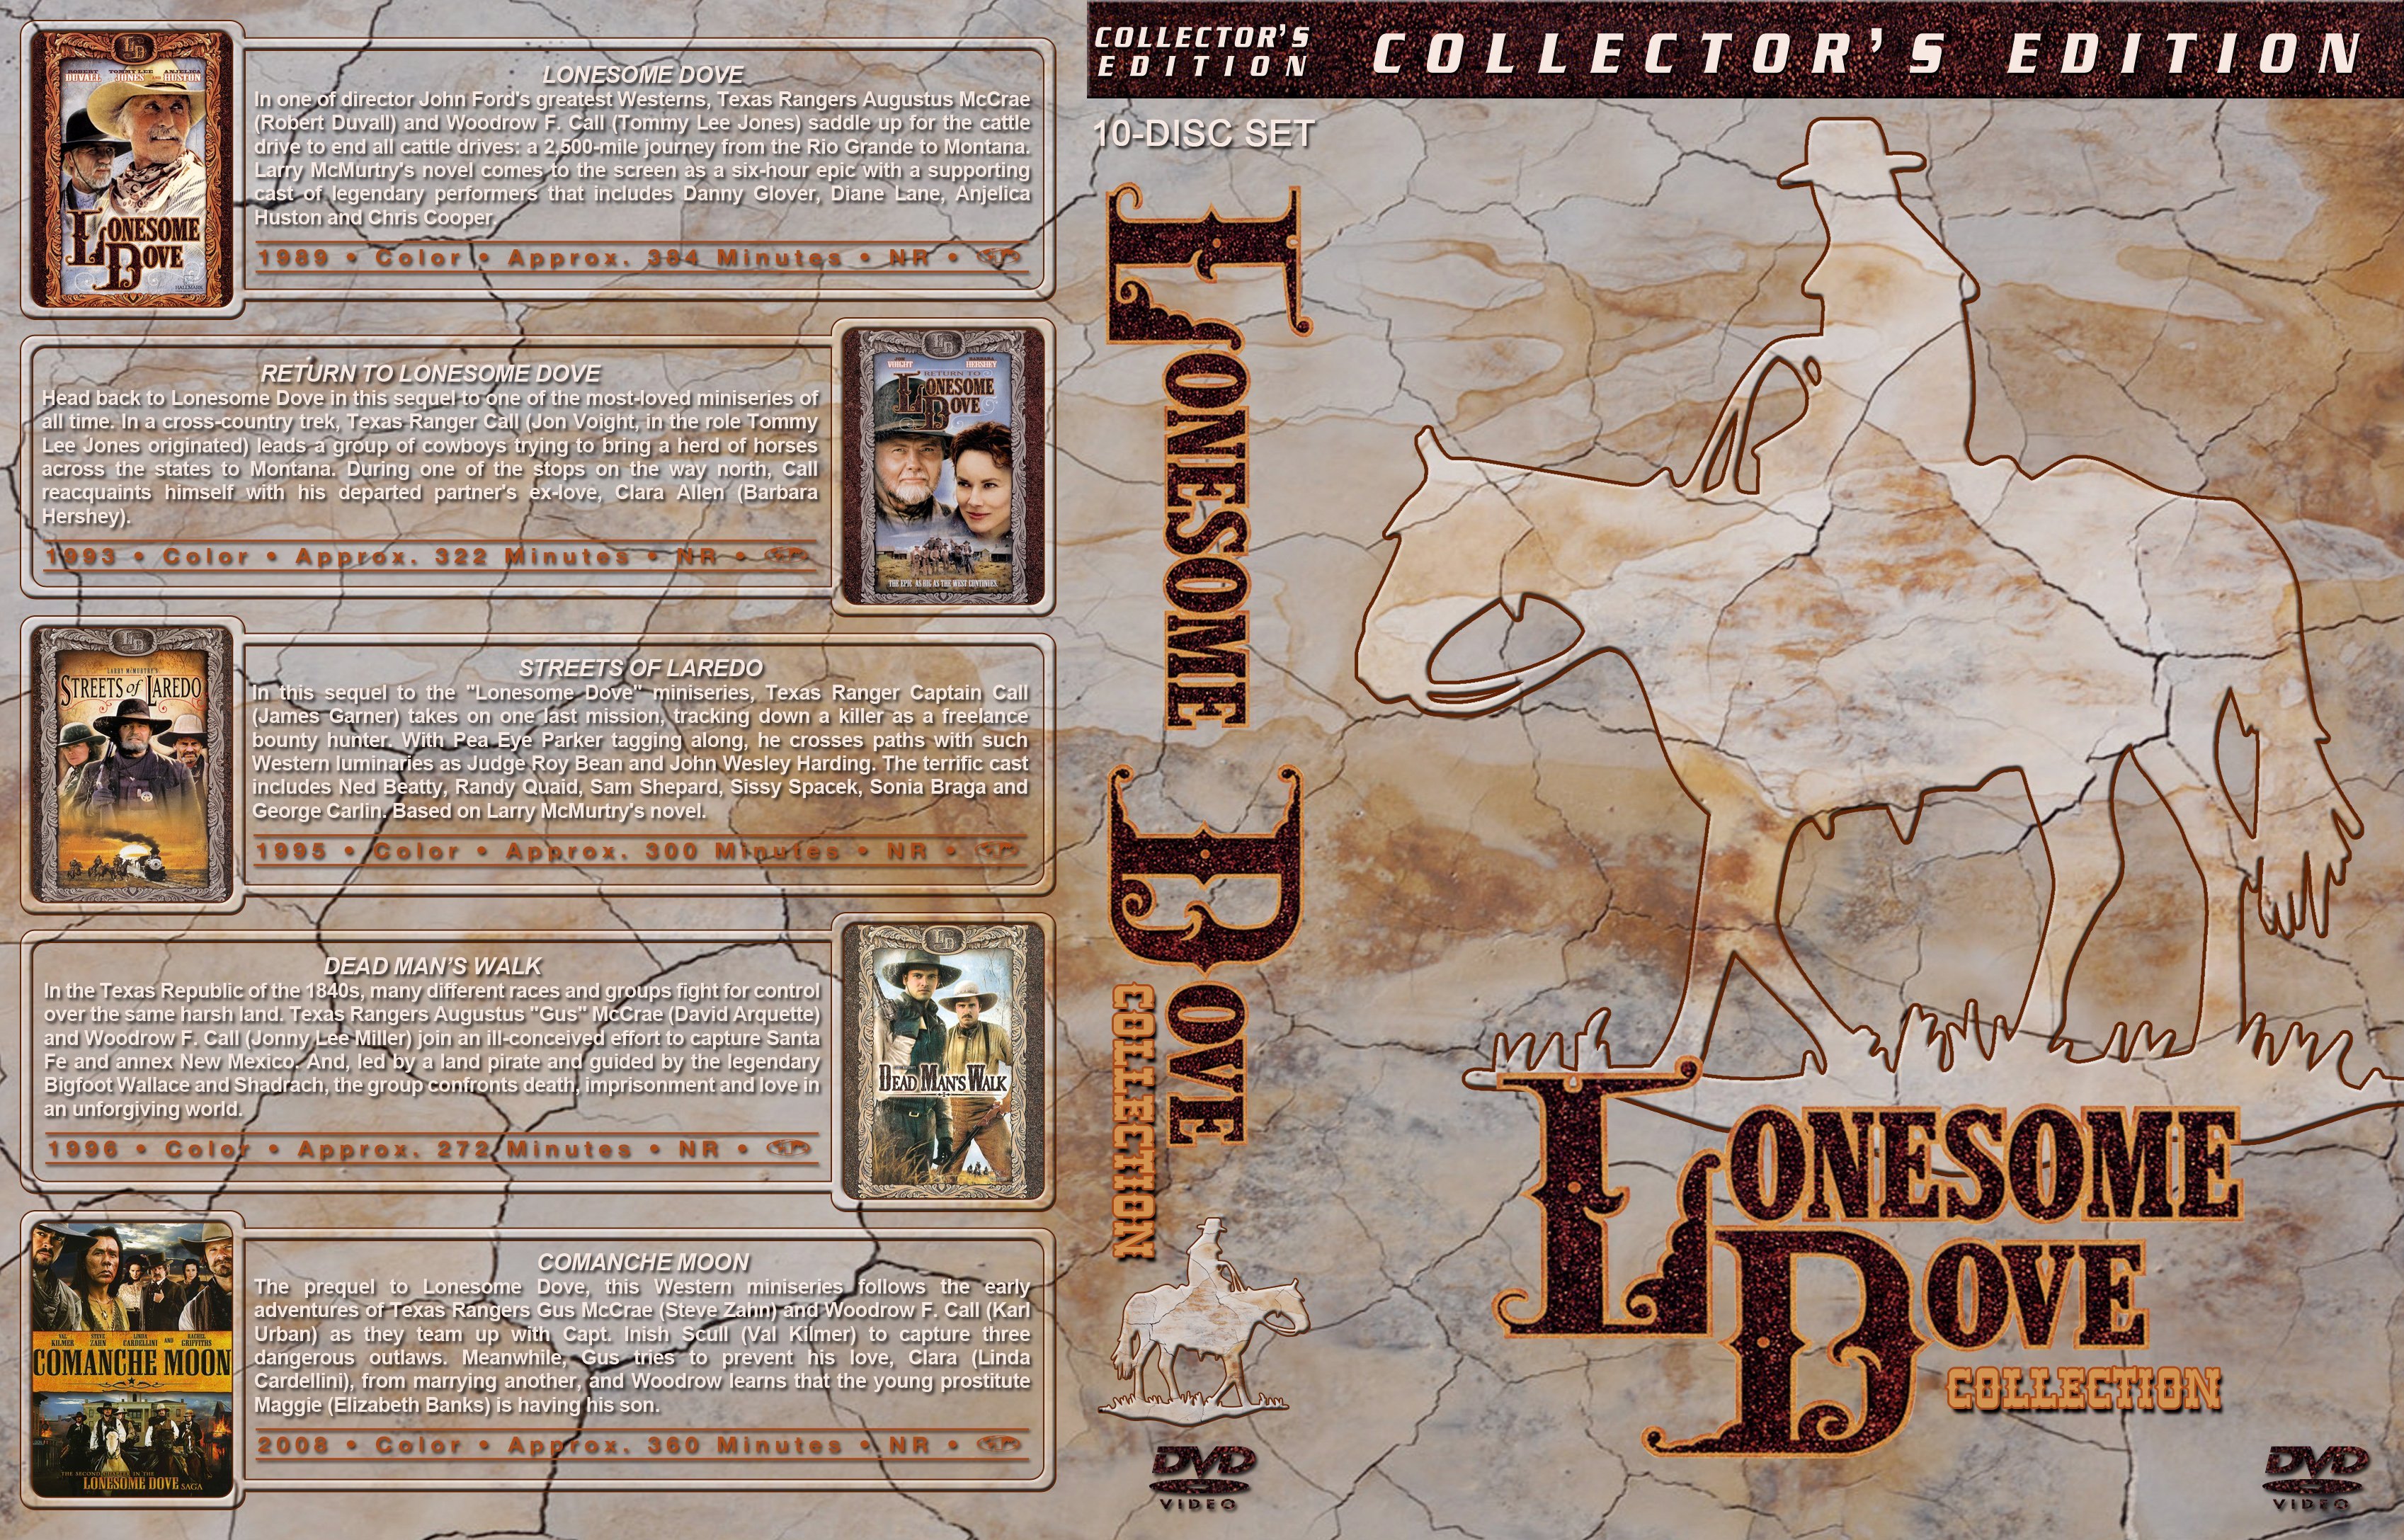 Lonesome Dove Collection (5) (1989-2008) R1 Custom Cover.